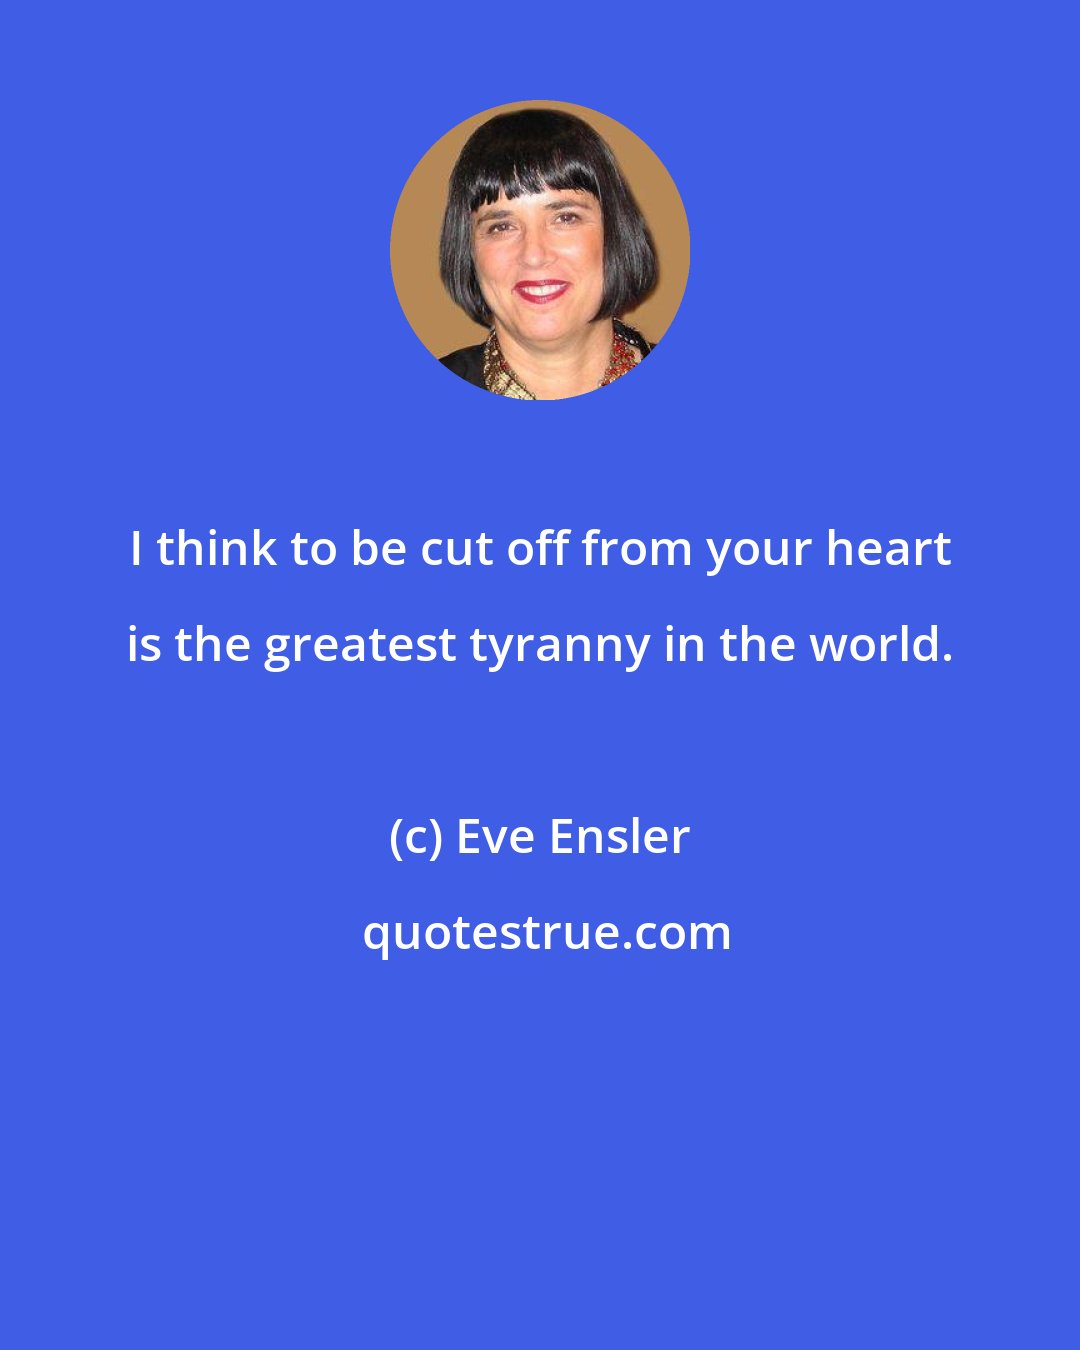 Eve Ensler: I think to be cut off from your heart is the greatest tyranny in the world.